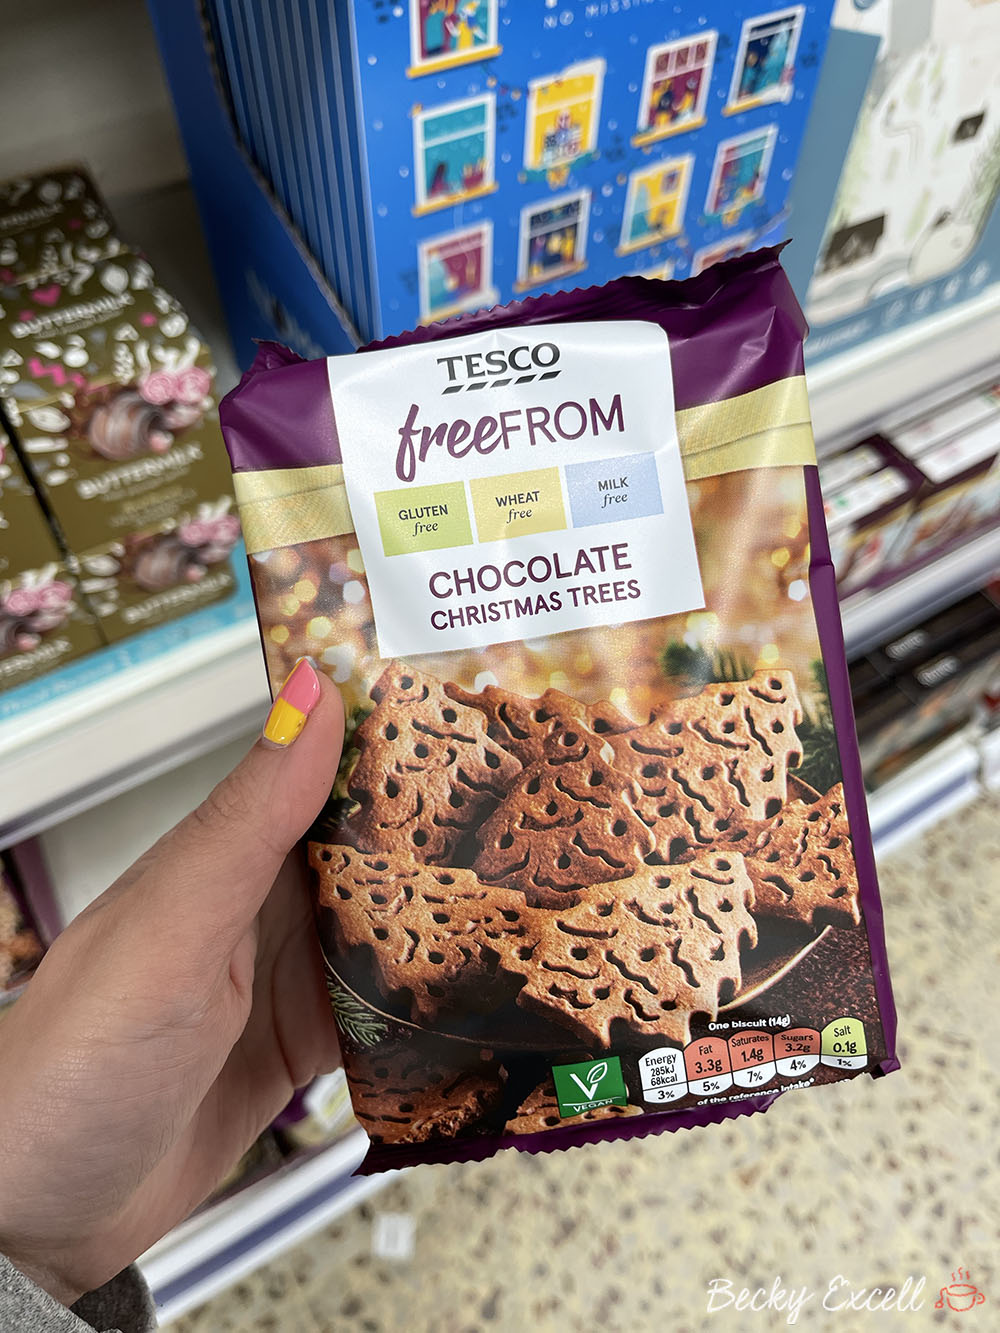 Tescos gluten-free Christmas products 2021: Free from Chocolate Christmas Trees